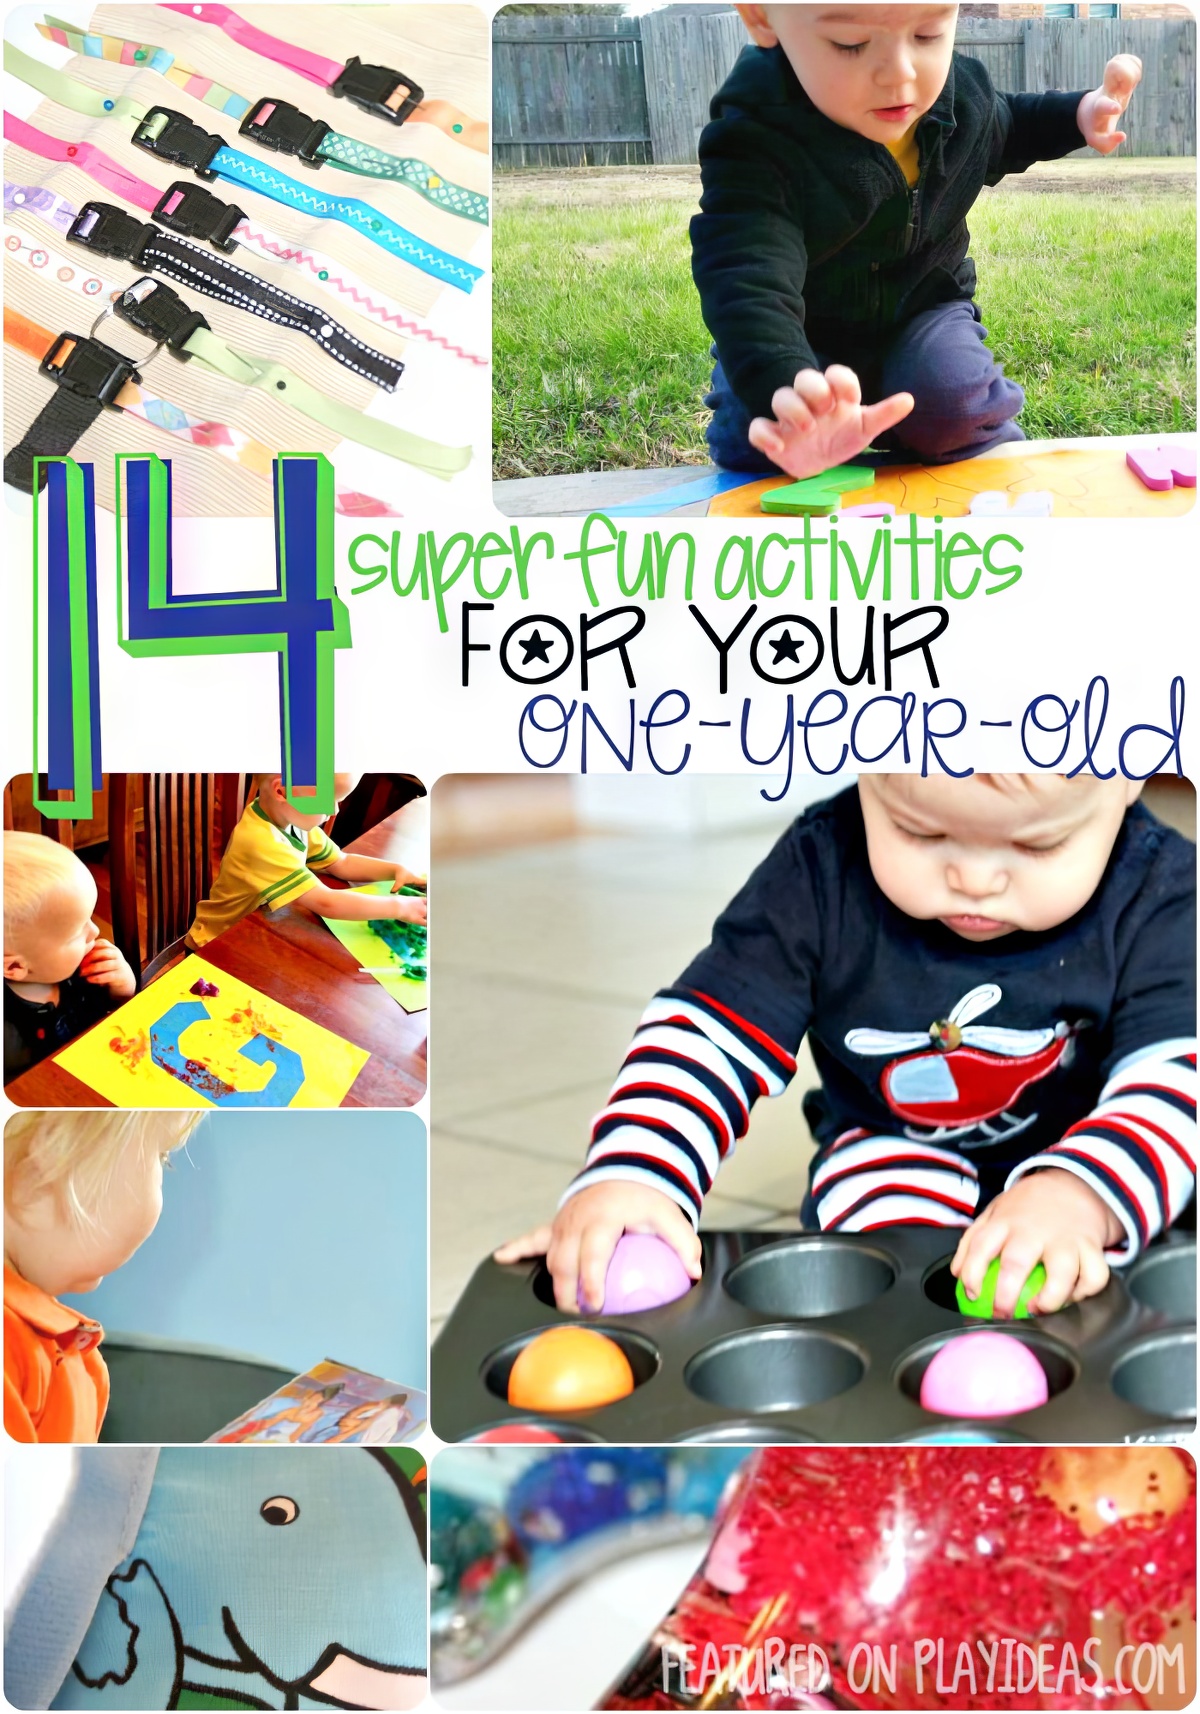 14 super fun activities for your one year old